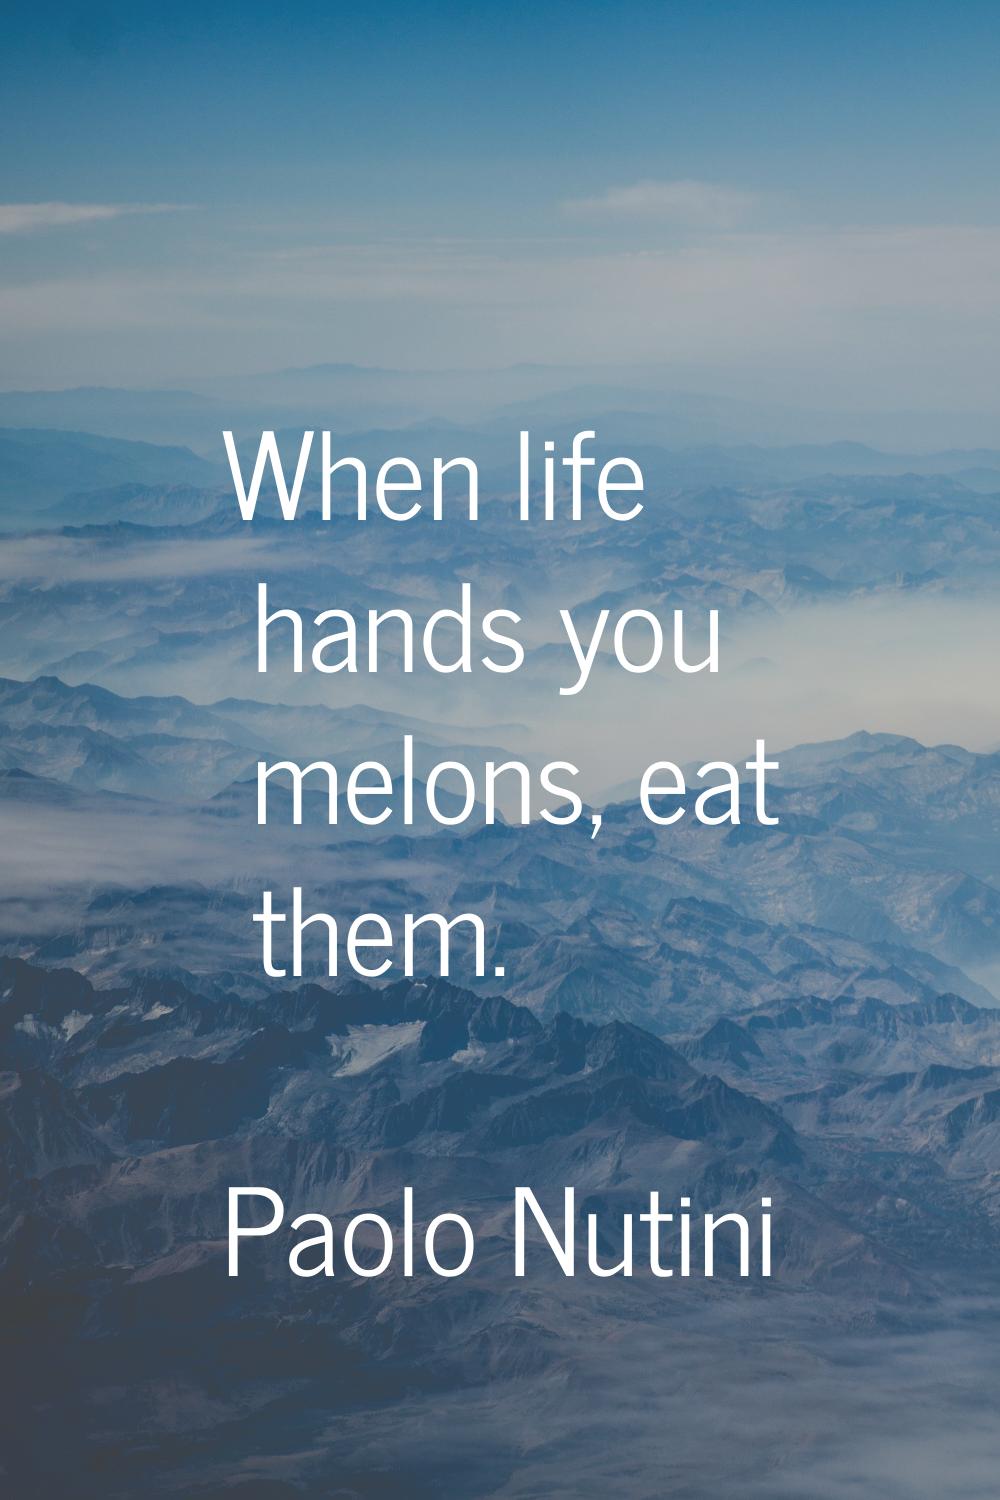 When life hands you melons, eat them.